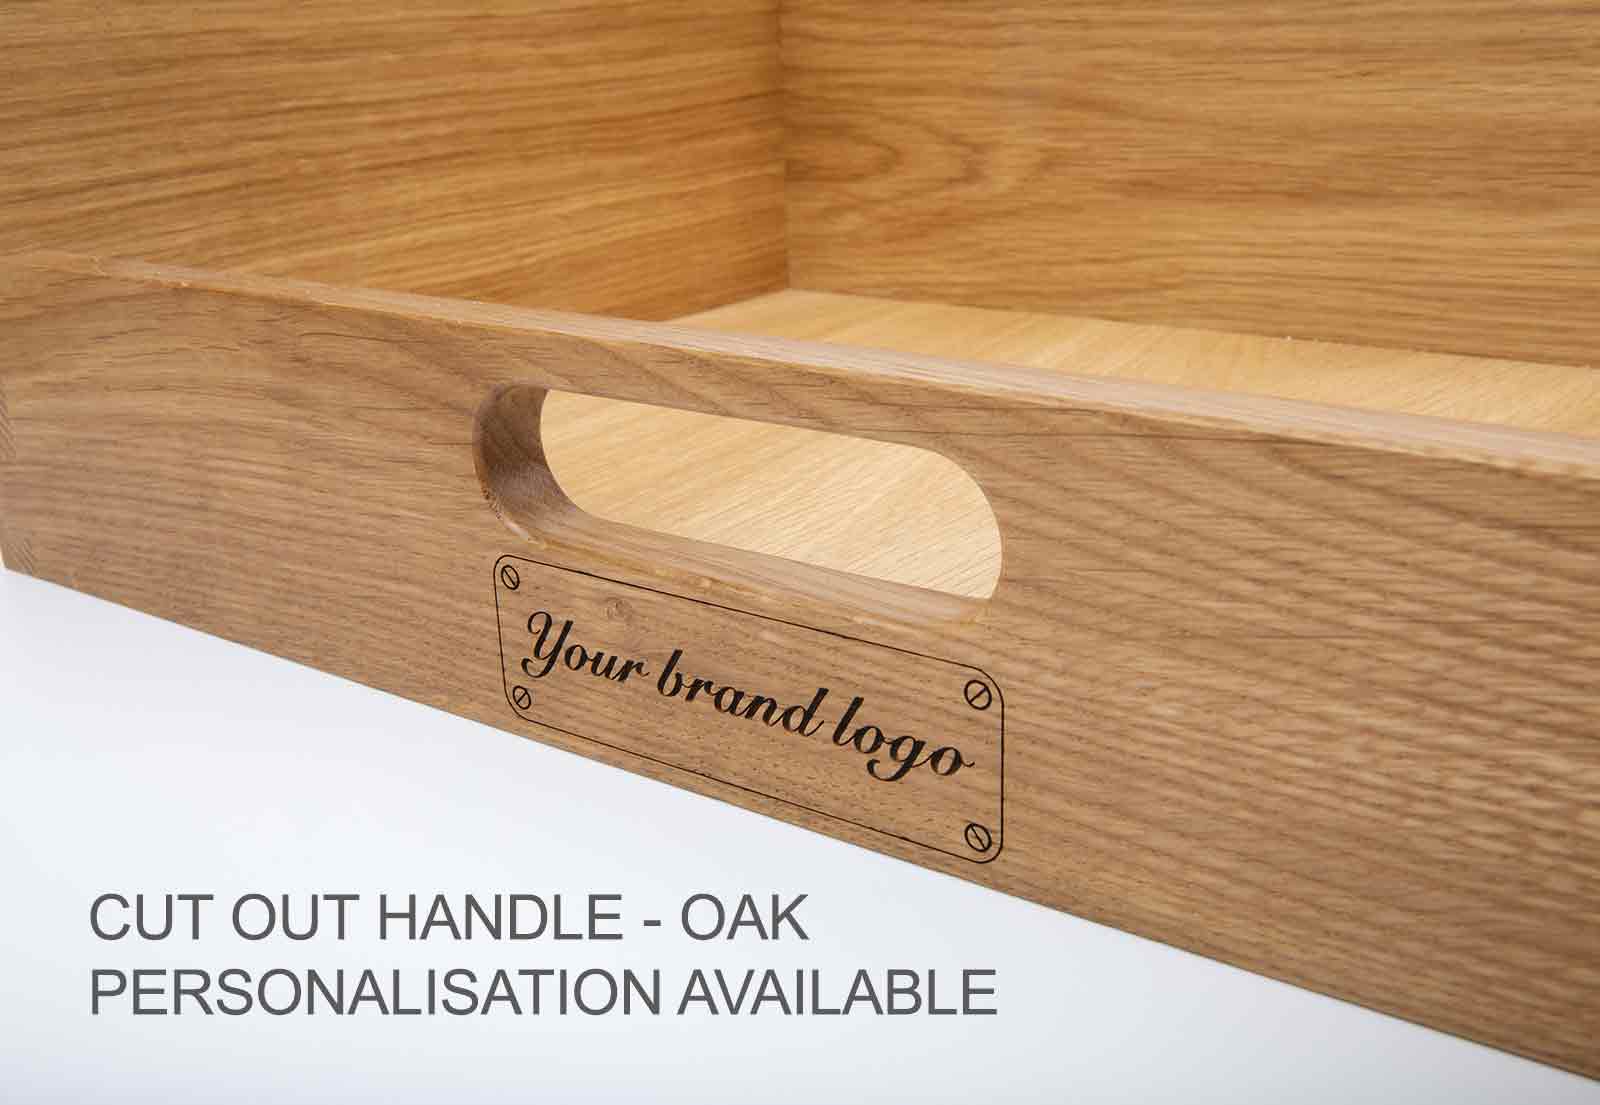 Cut out handle in oak with personalisation